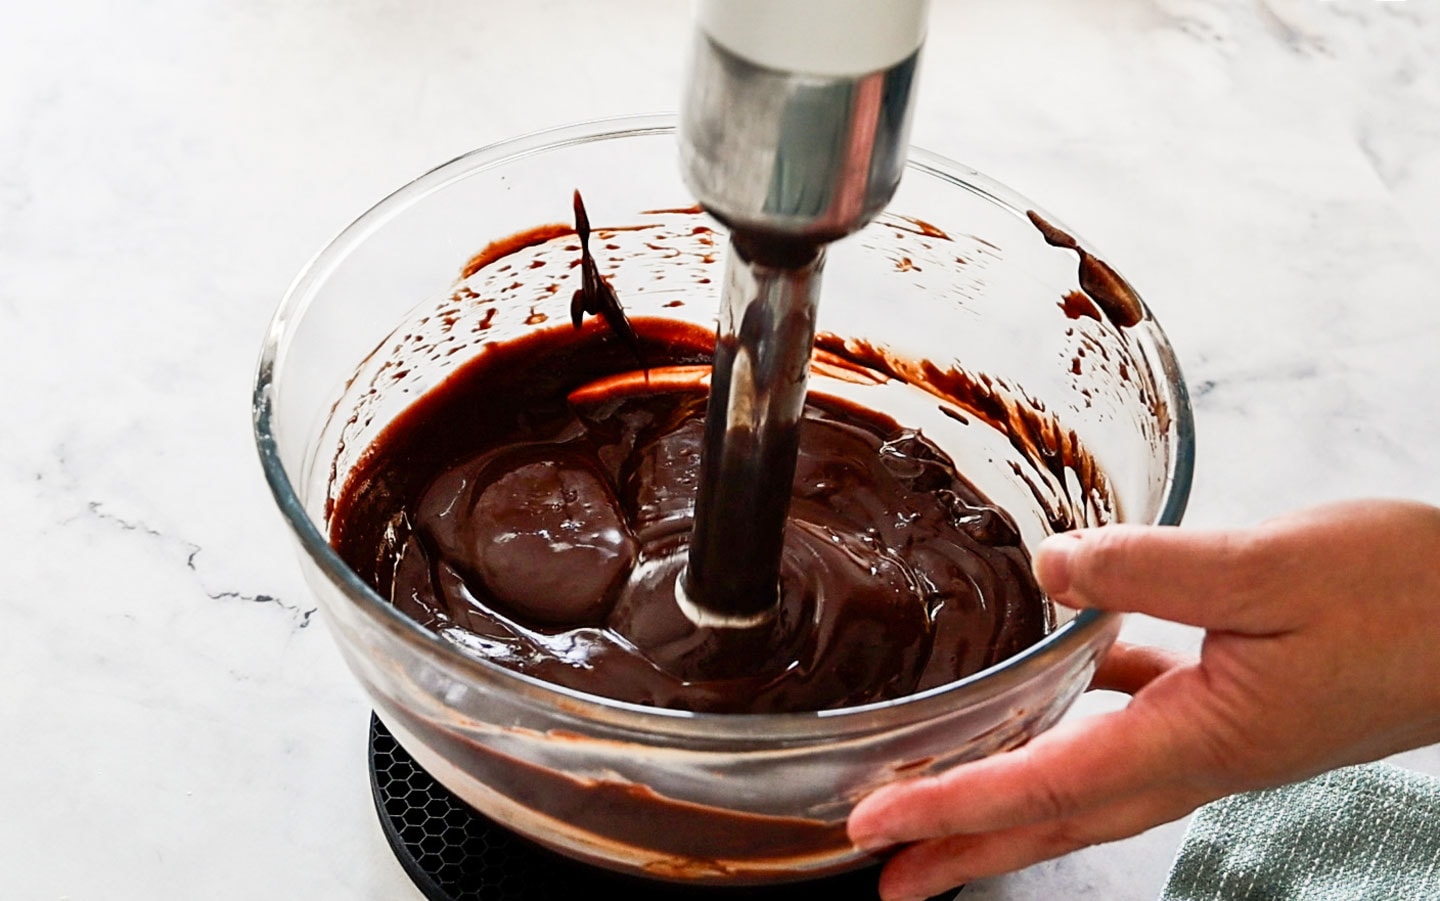 Using an immersion blender to smooth the cremeux.